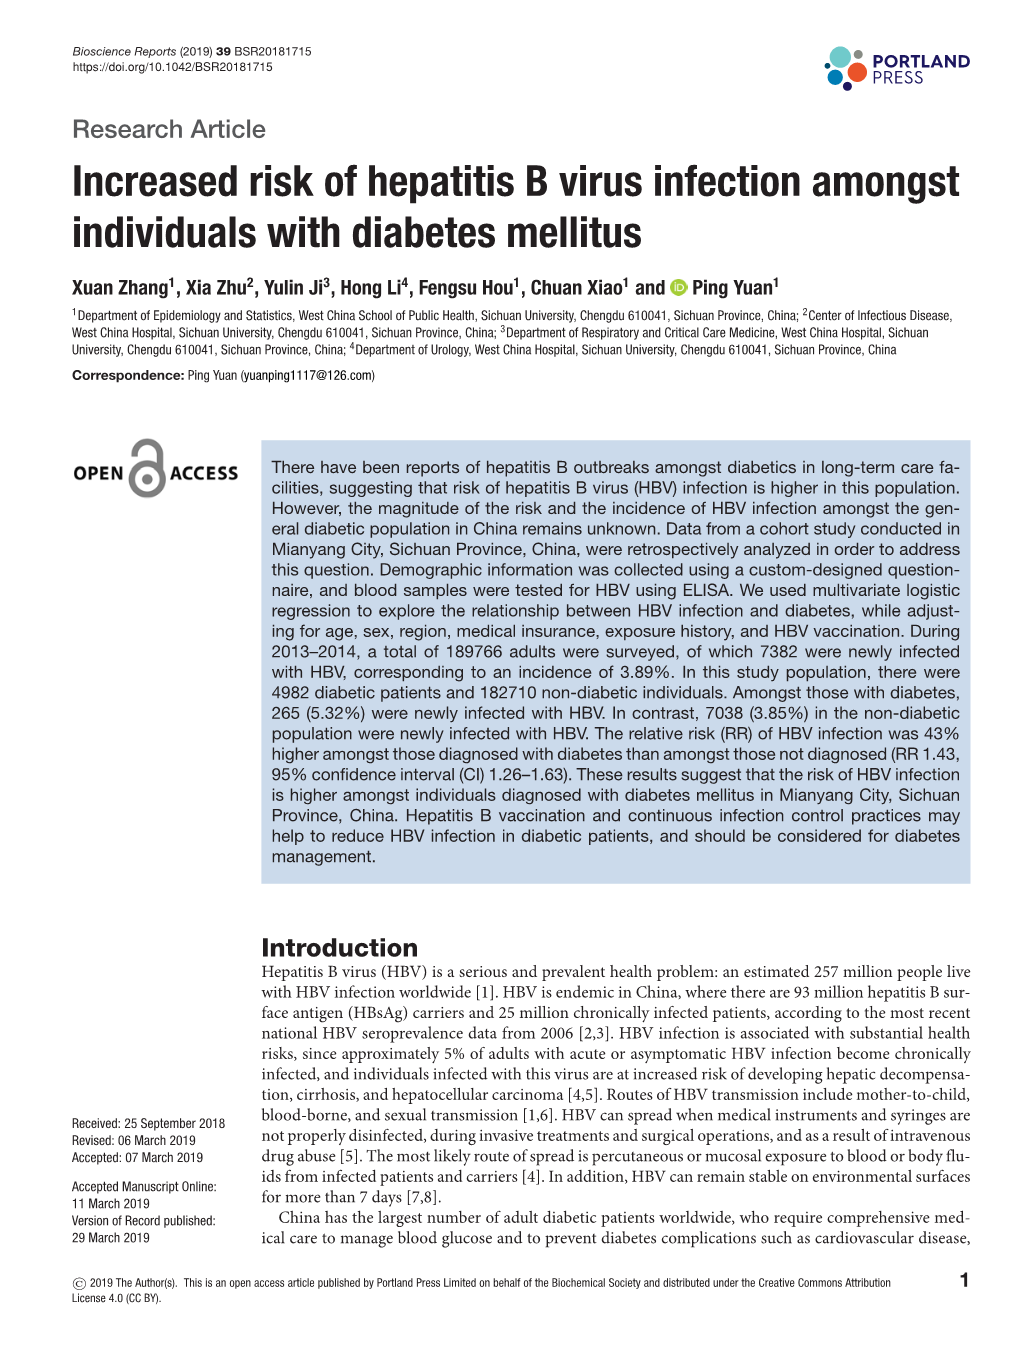 Increased Risk of Hepatitis B Virus Infection Amongst Individuals with Diabetes Mellitus